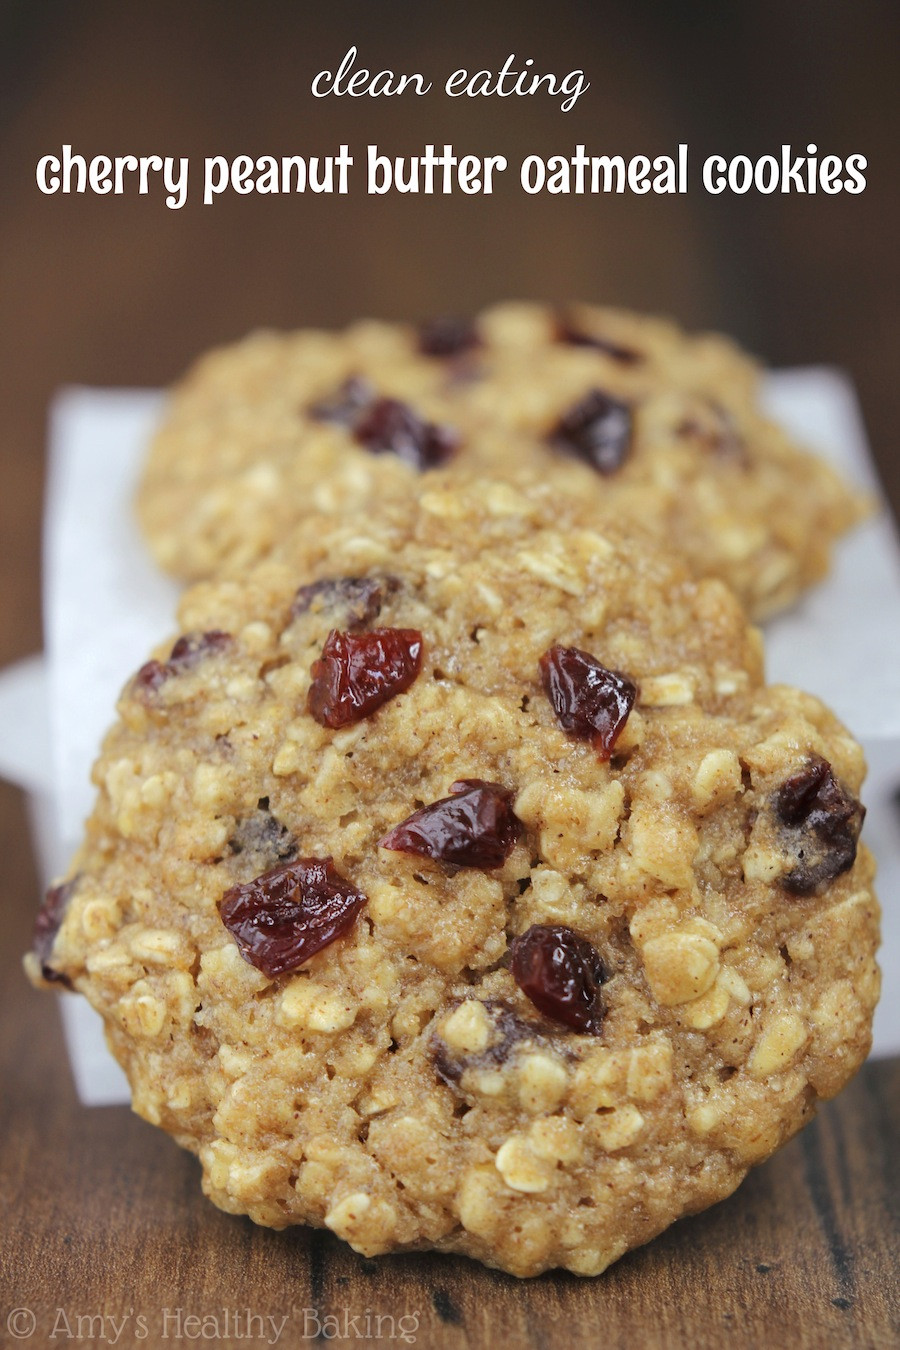 Healthy Peanut Butter Oatmeal Cookies
 Cherry Peanut Butter Oatmeal Cookies